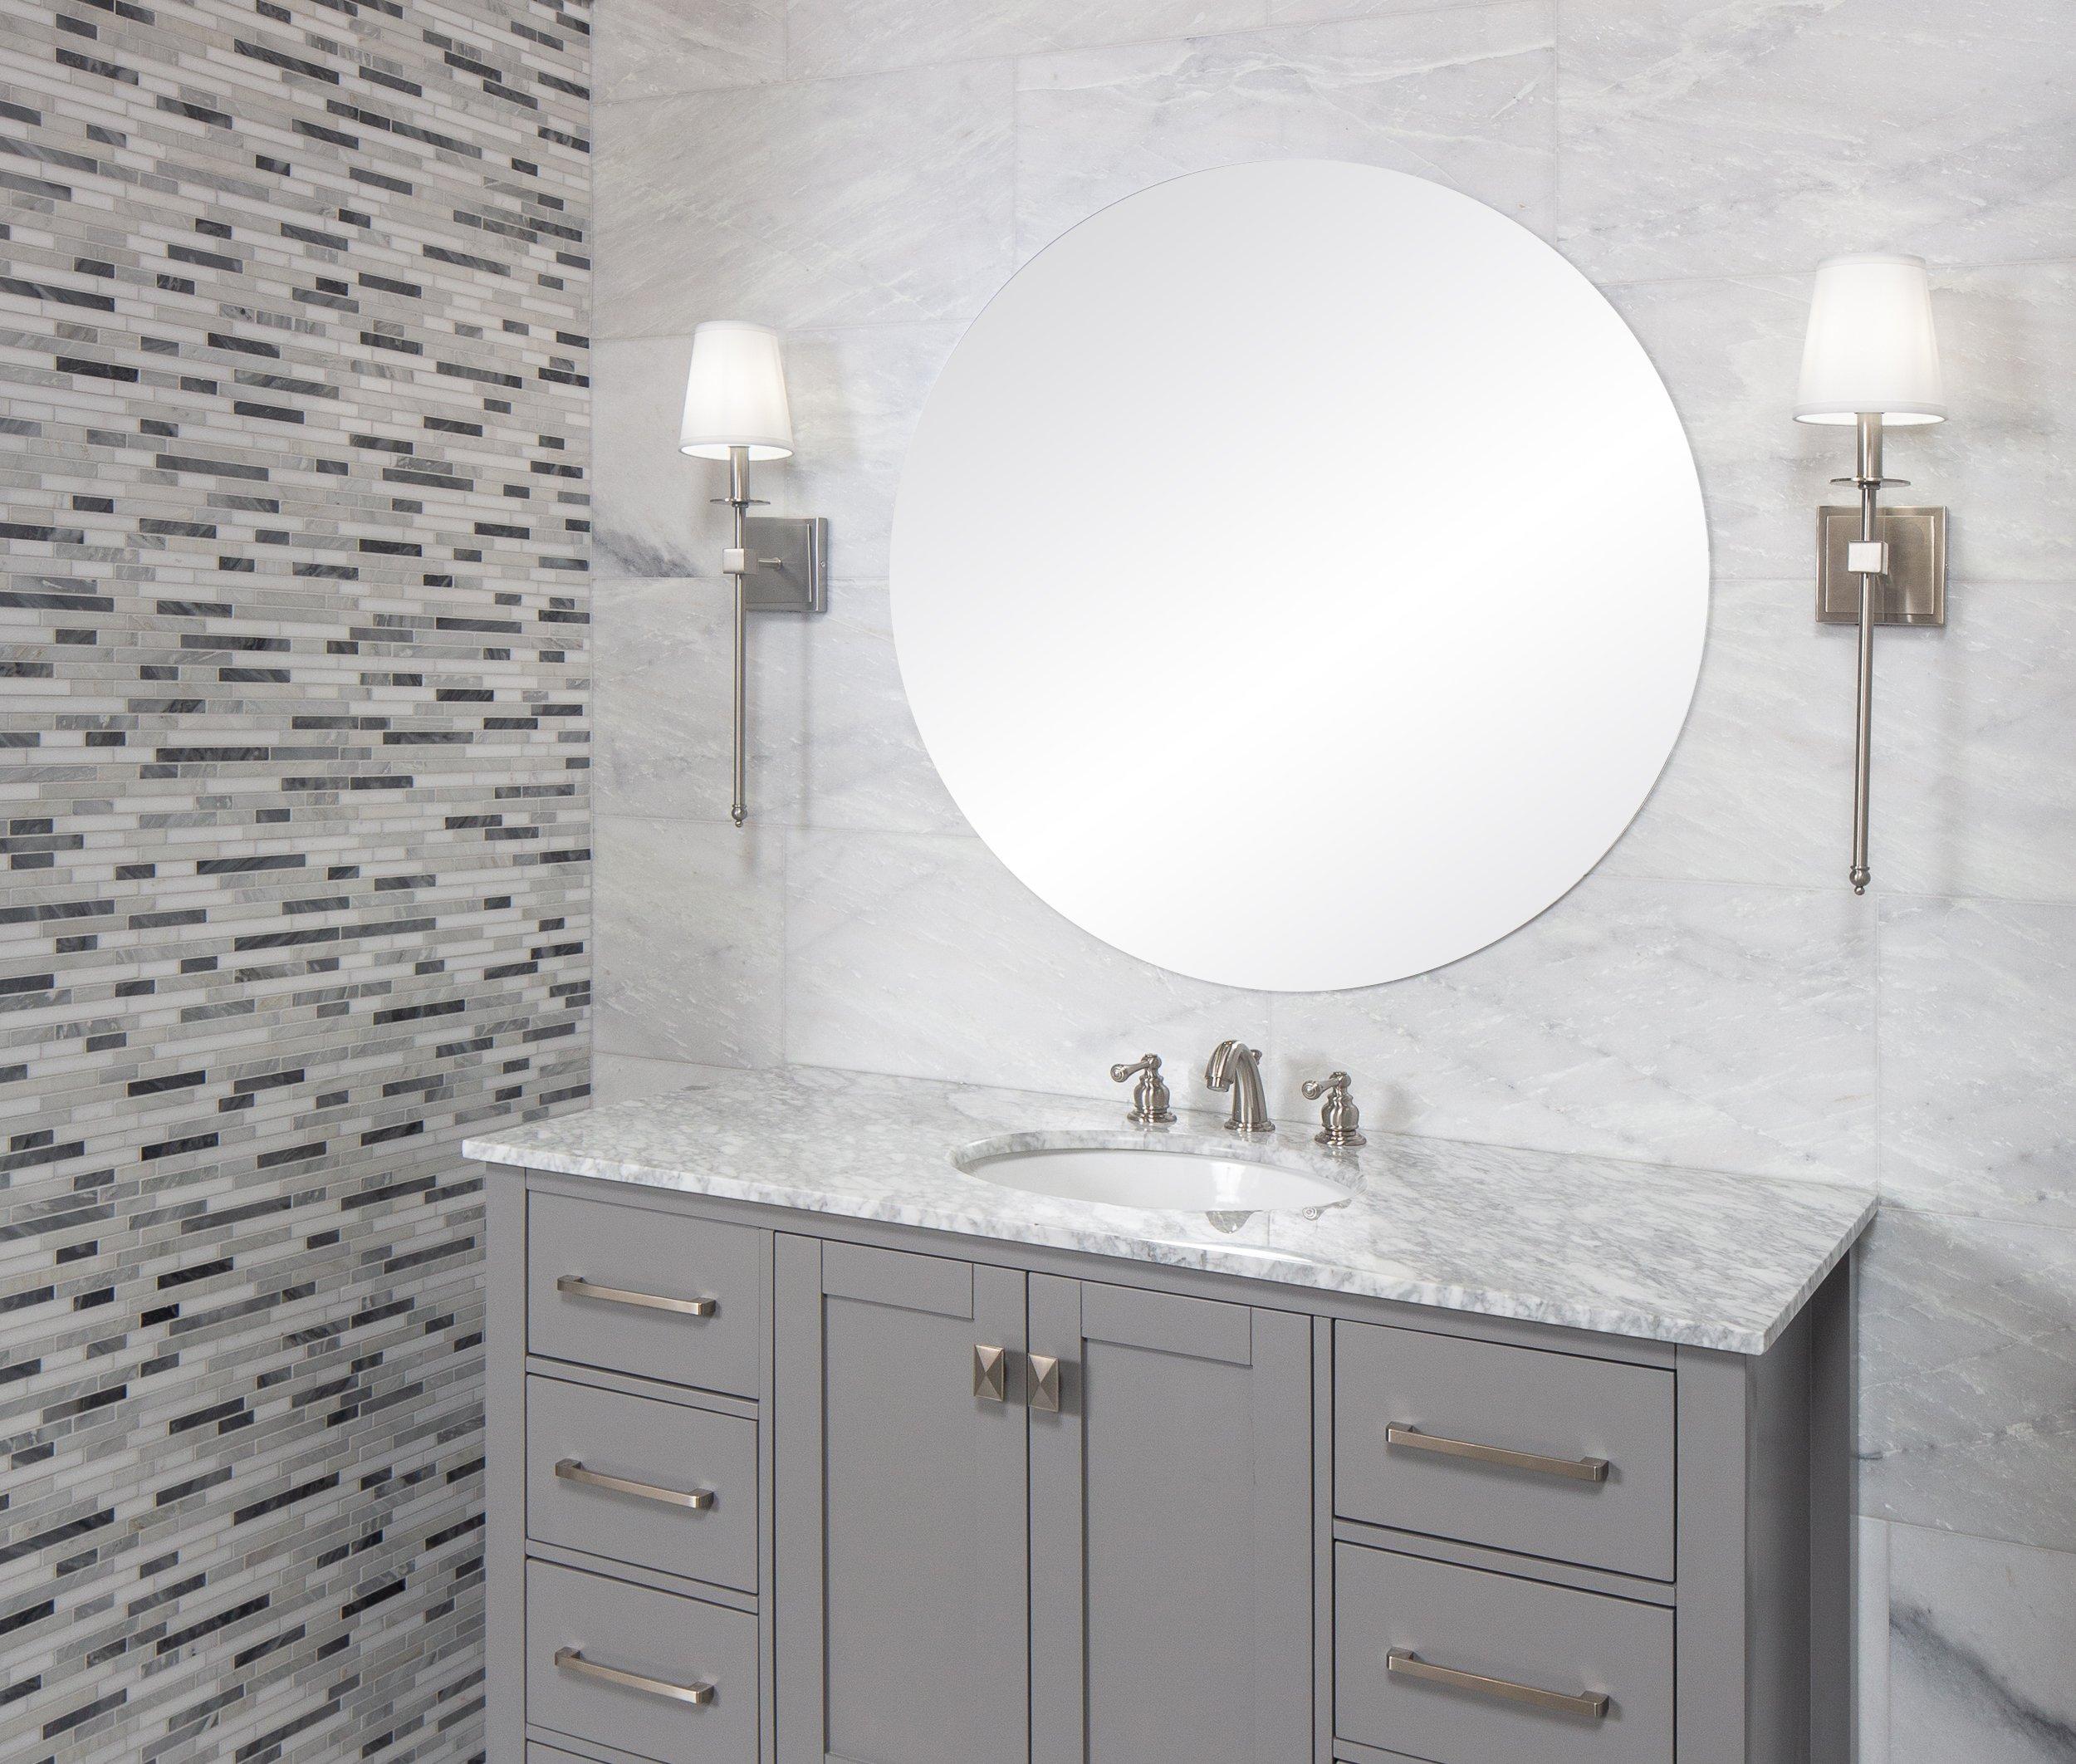 Dove Gray and White Polished Linear Marble Mosaic